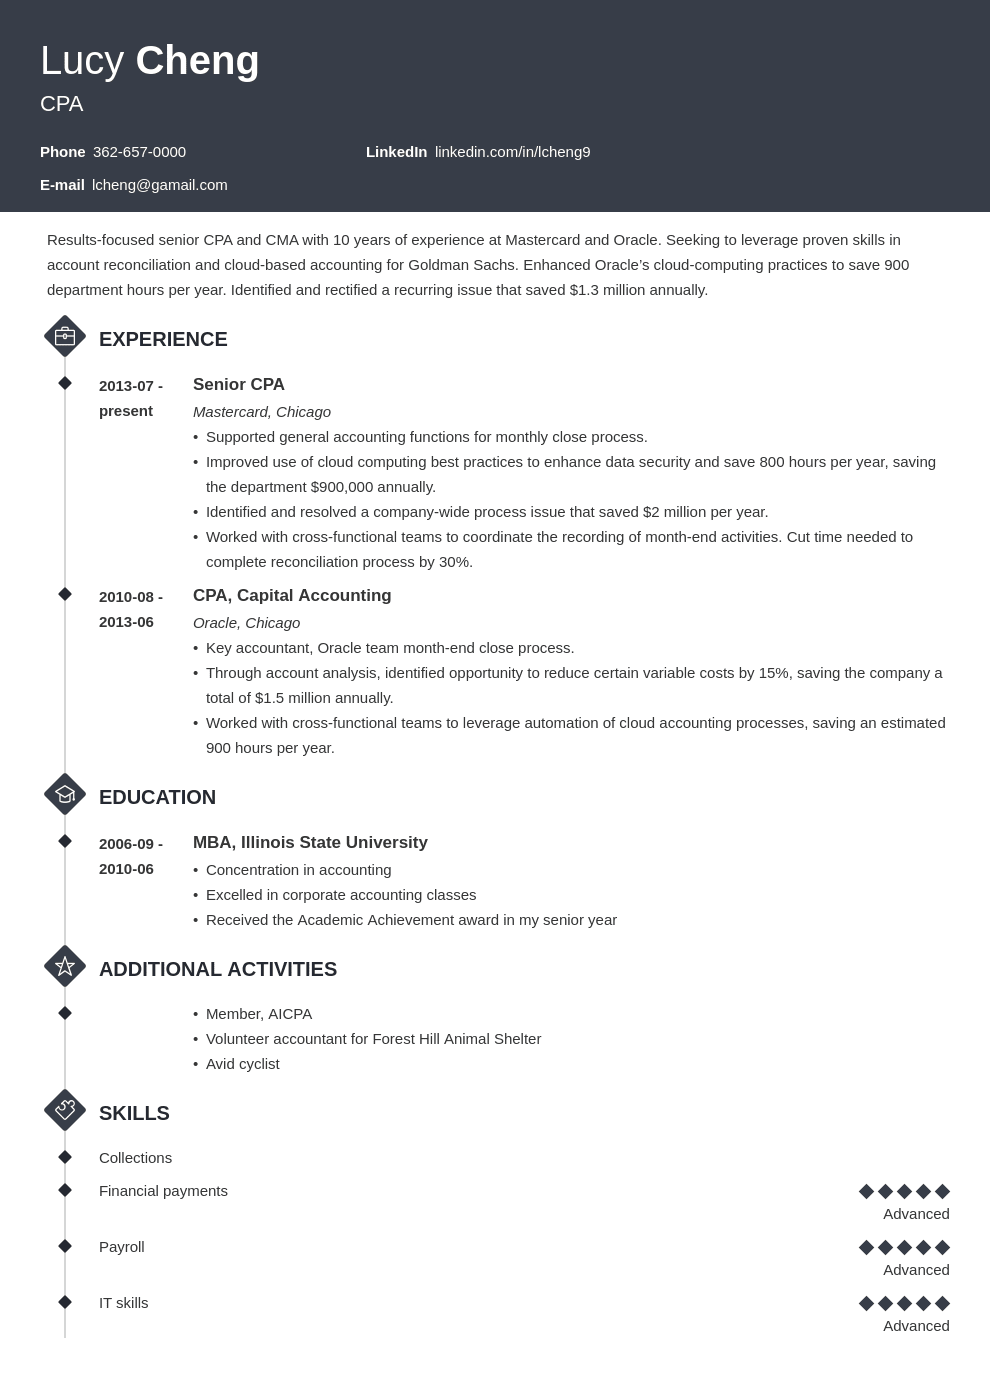 How I Improved My resume In One Day